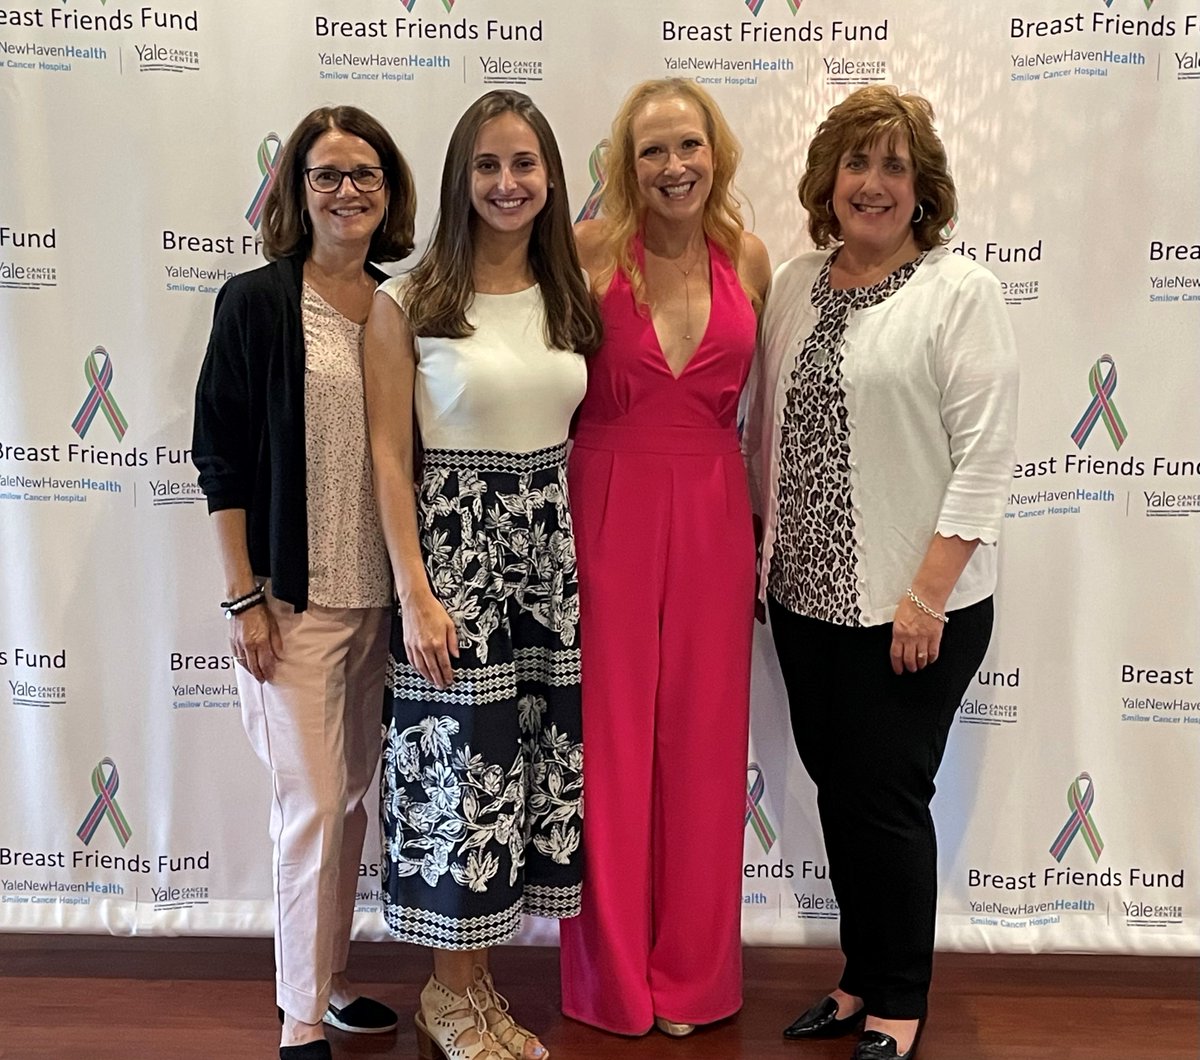 Ion Bank Foundation was a proud supporter of last evenings “Taste The Cure” supporting Breast Friends Fund. 100% of funds raised do to Metastatic Breast Cancer Research. breastfriendsfund.org.
#Community #IonBankFoundation #ResearchIsKey #Cancer